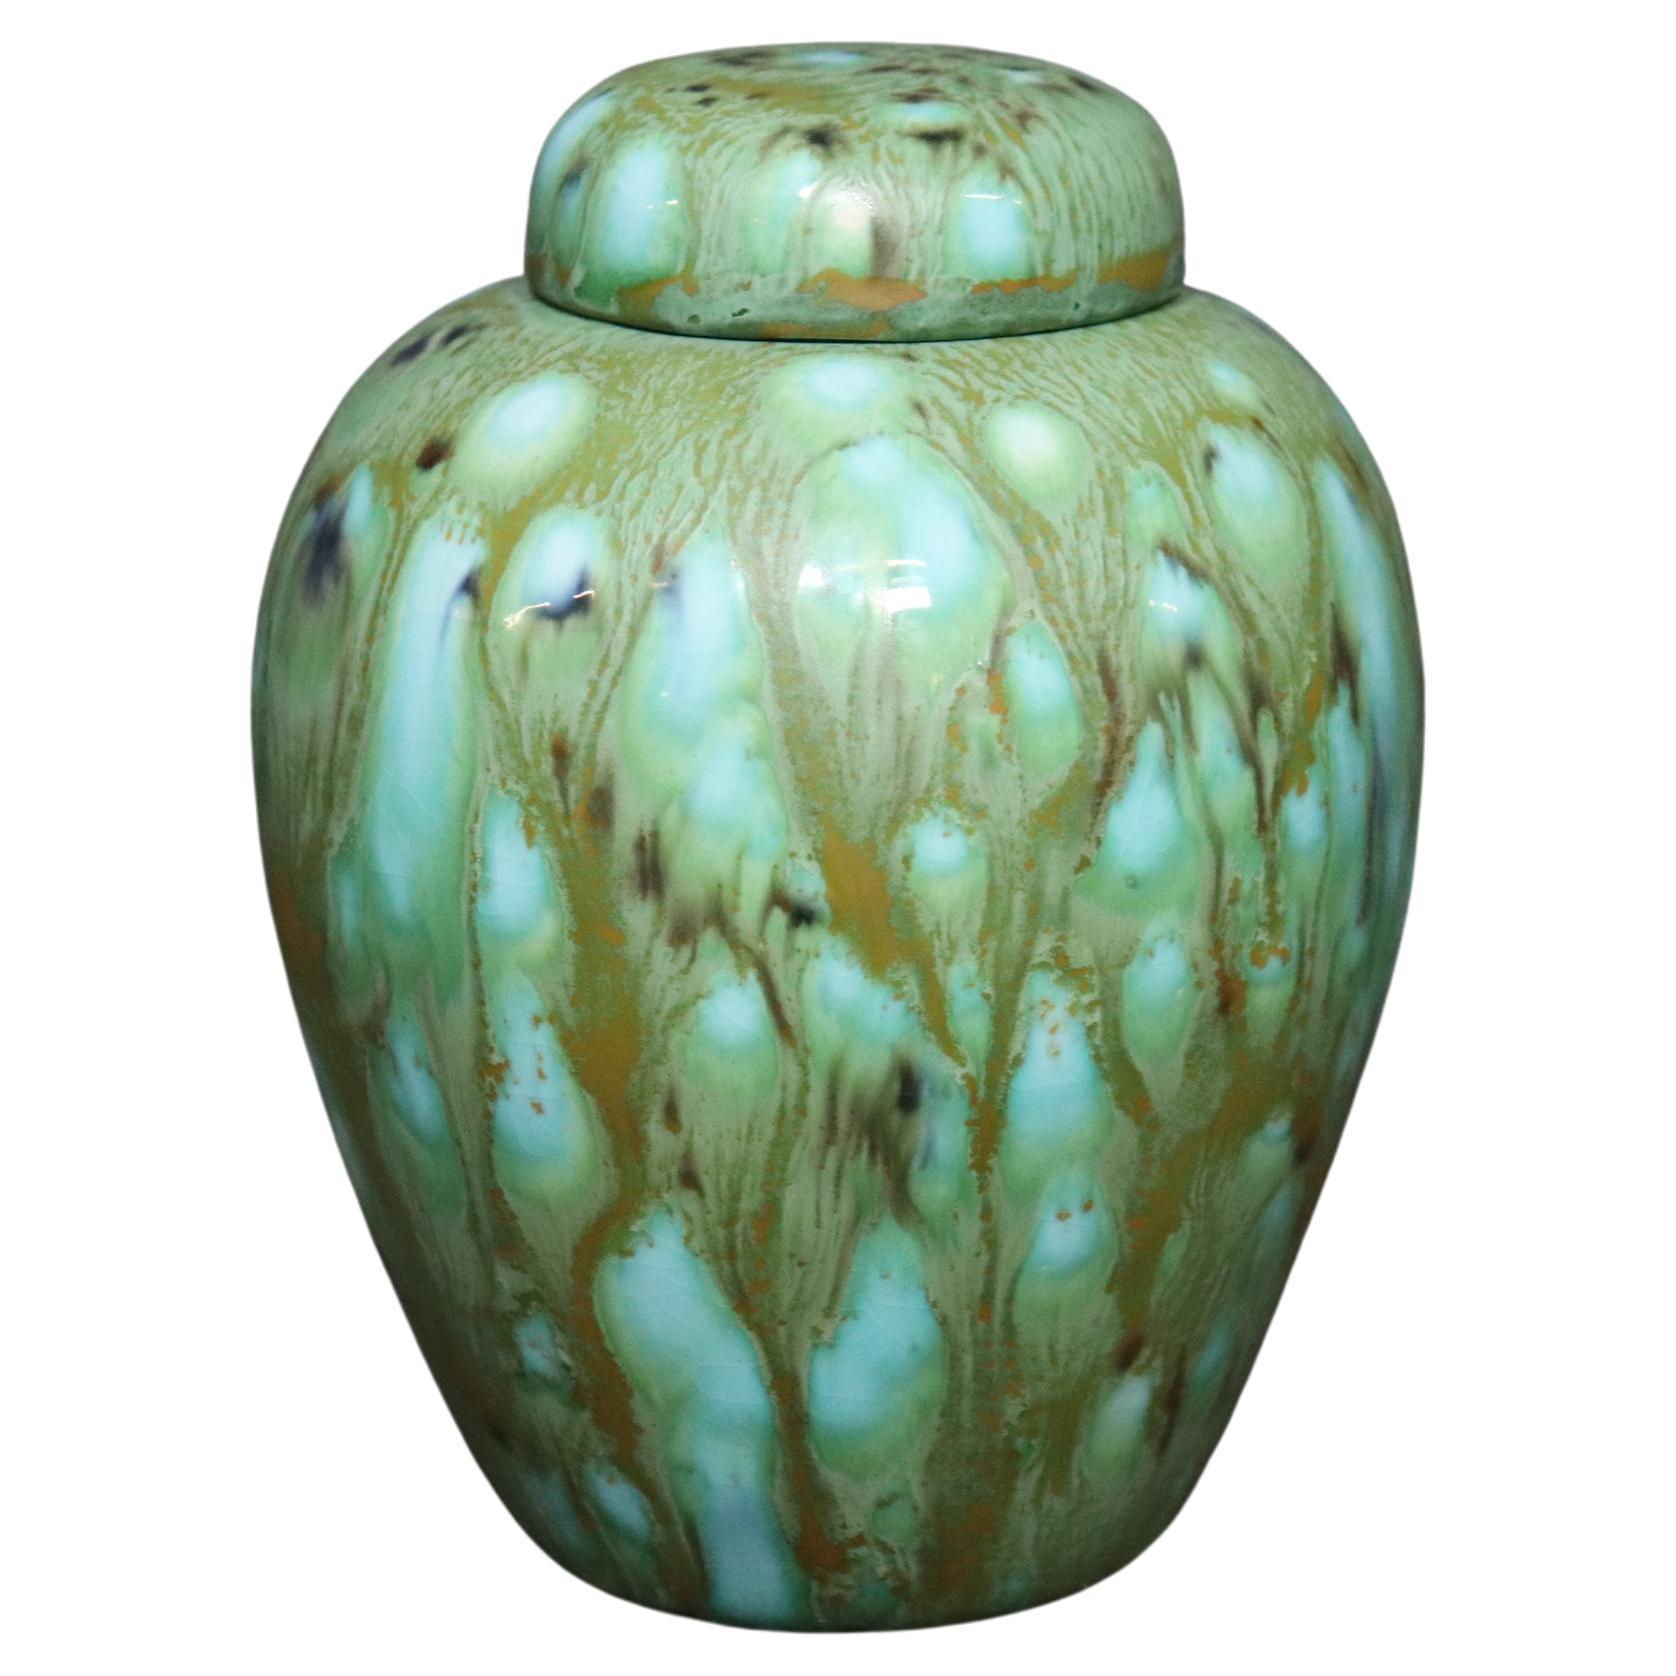 Rare Mid-Century Modern MCM Pottery Vase, Jar with Lid Signed "Beth Salin 1970" For Sale